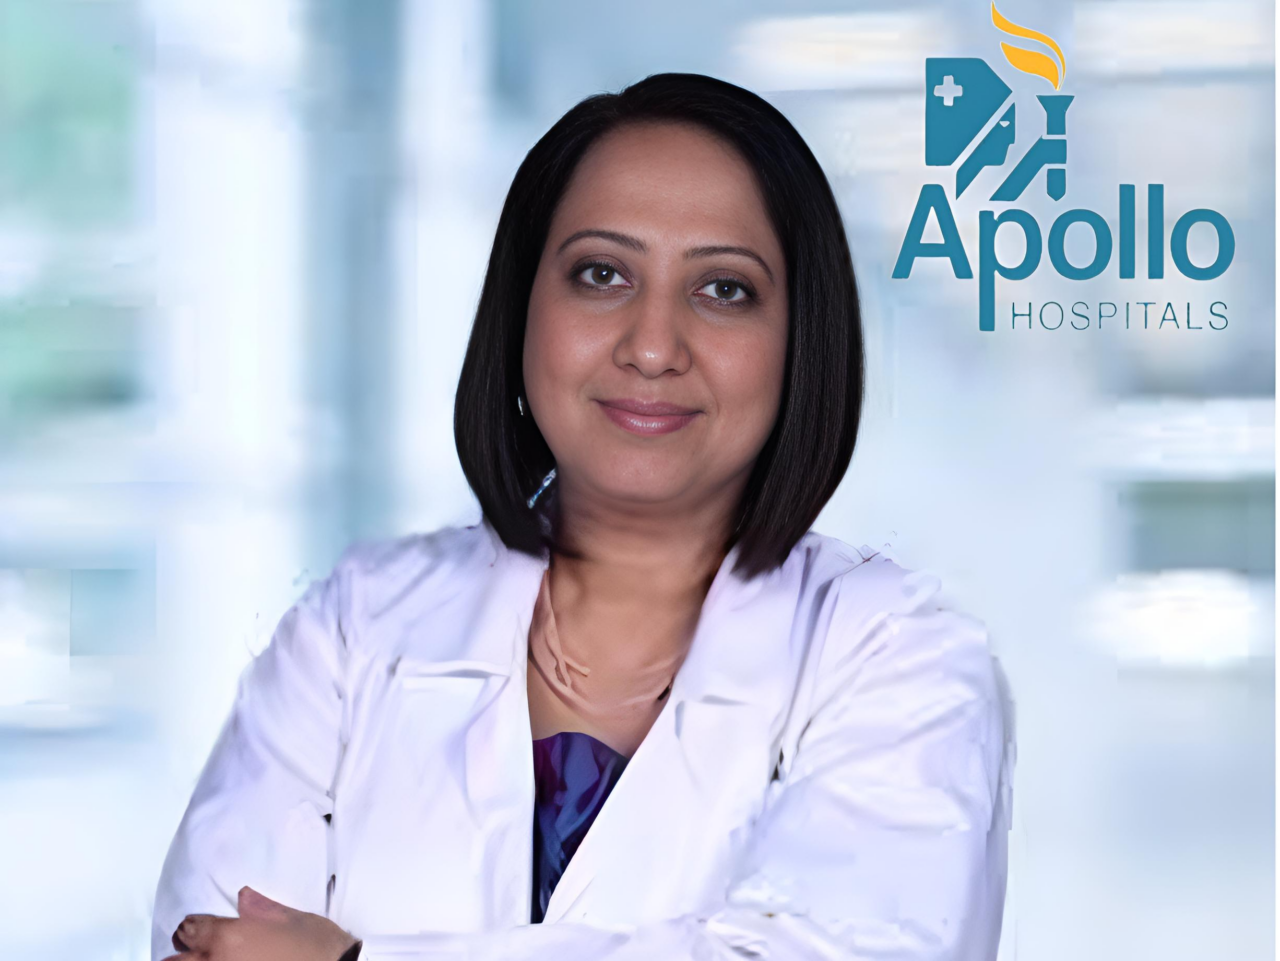 Jyoti Bajpai: I am starting a new position as Lead Medical and Precision Oncology, at Apollo Hospitals